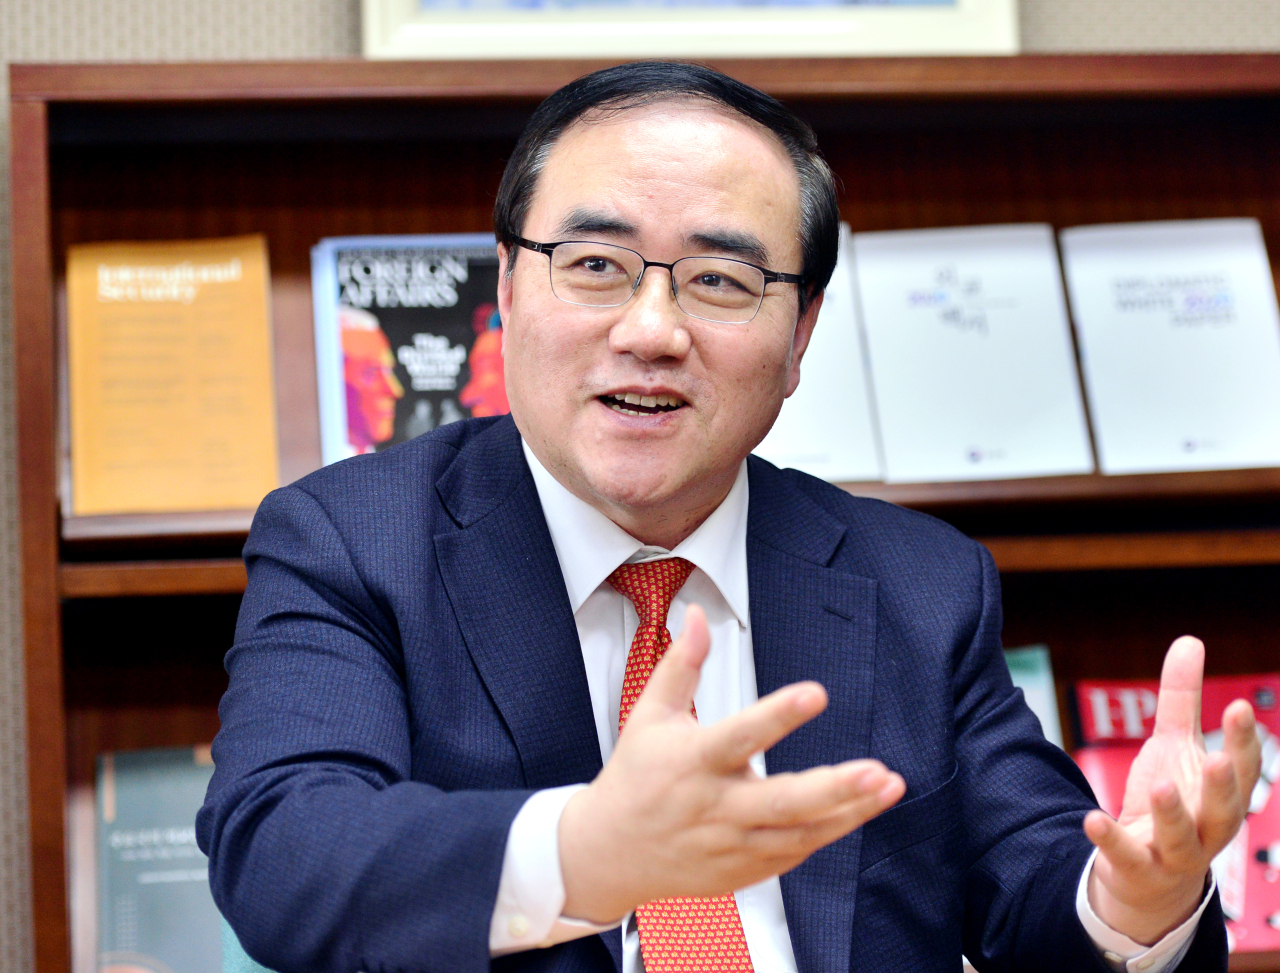 Professor Kim Sung-han of Korea University’s Graduate School of International Studies, who serves as the key foreign policy adviser for Yoon Suk-yeol, speaks during an interview with The Korea Herald at his office in Seoul. (Park Hyun-koo/The Korea Herald)